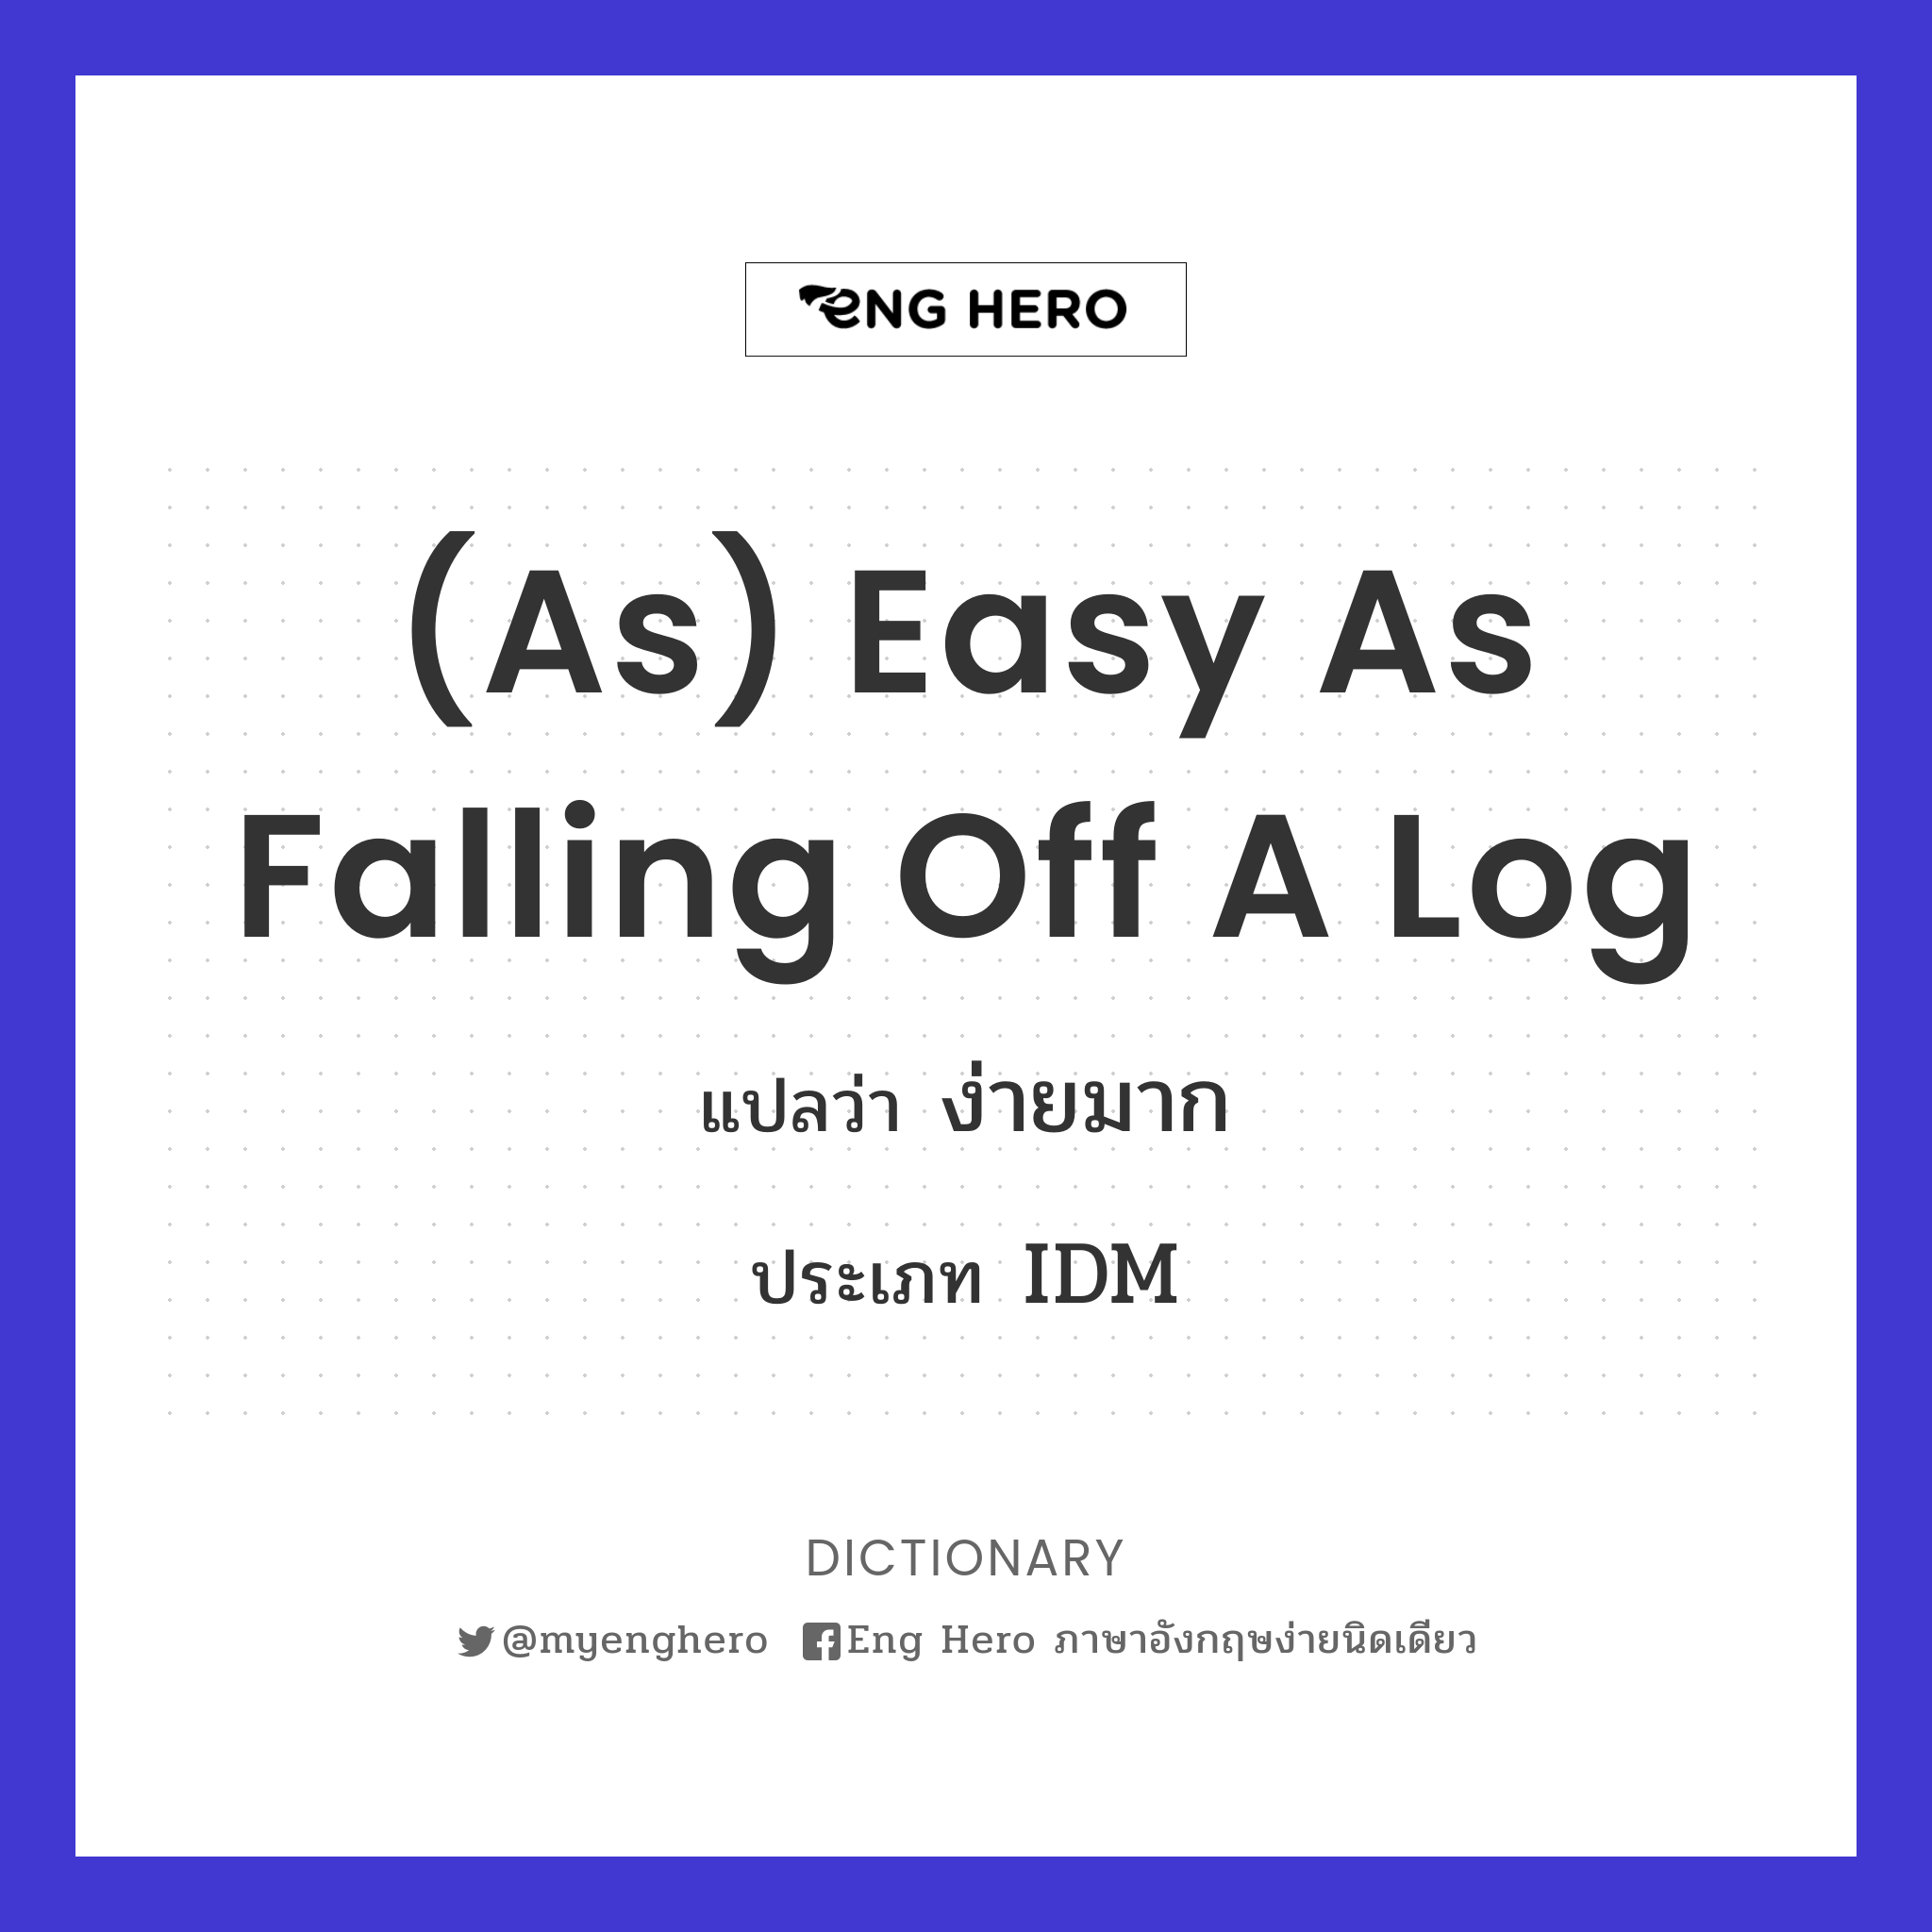 (as) easy as falling off a log